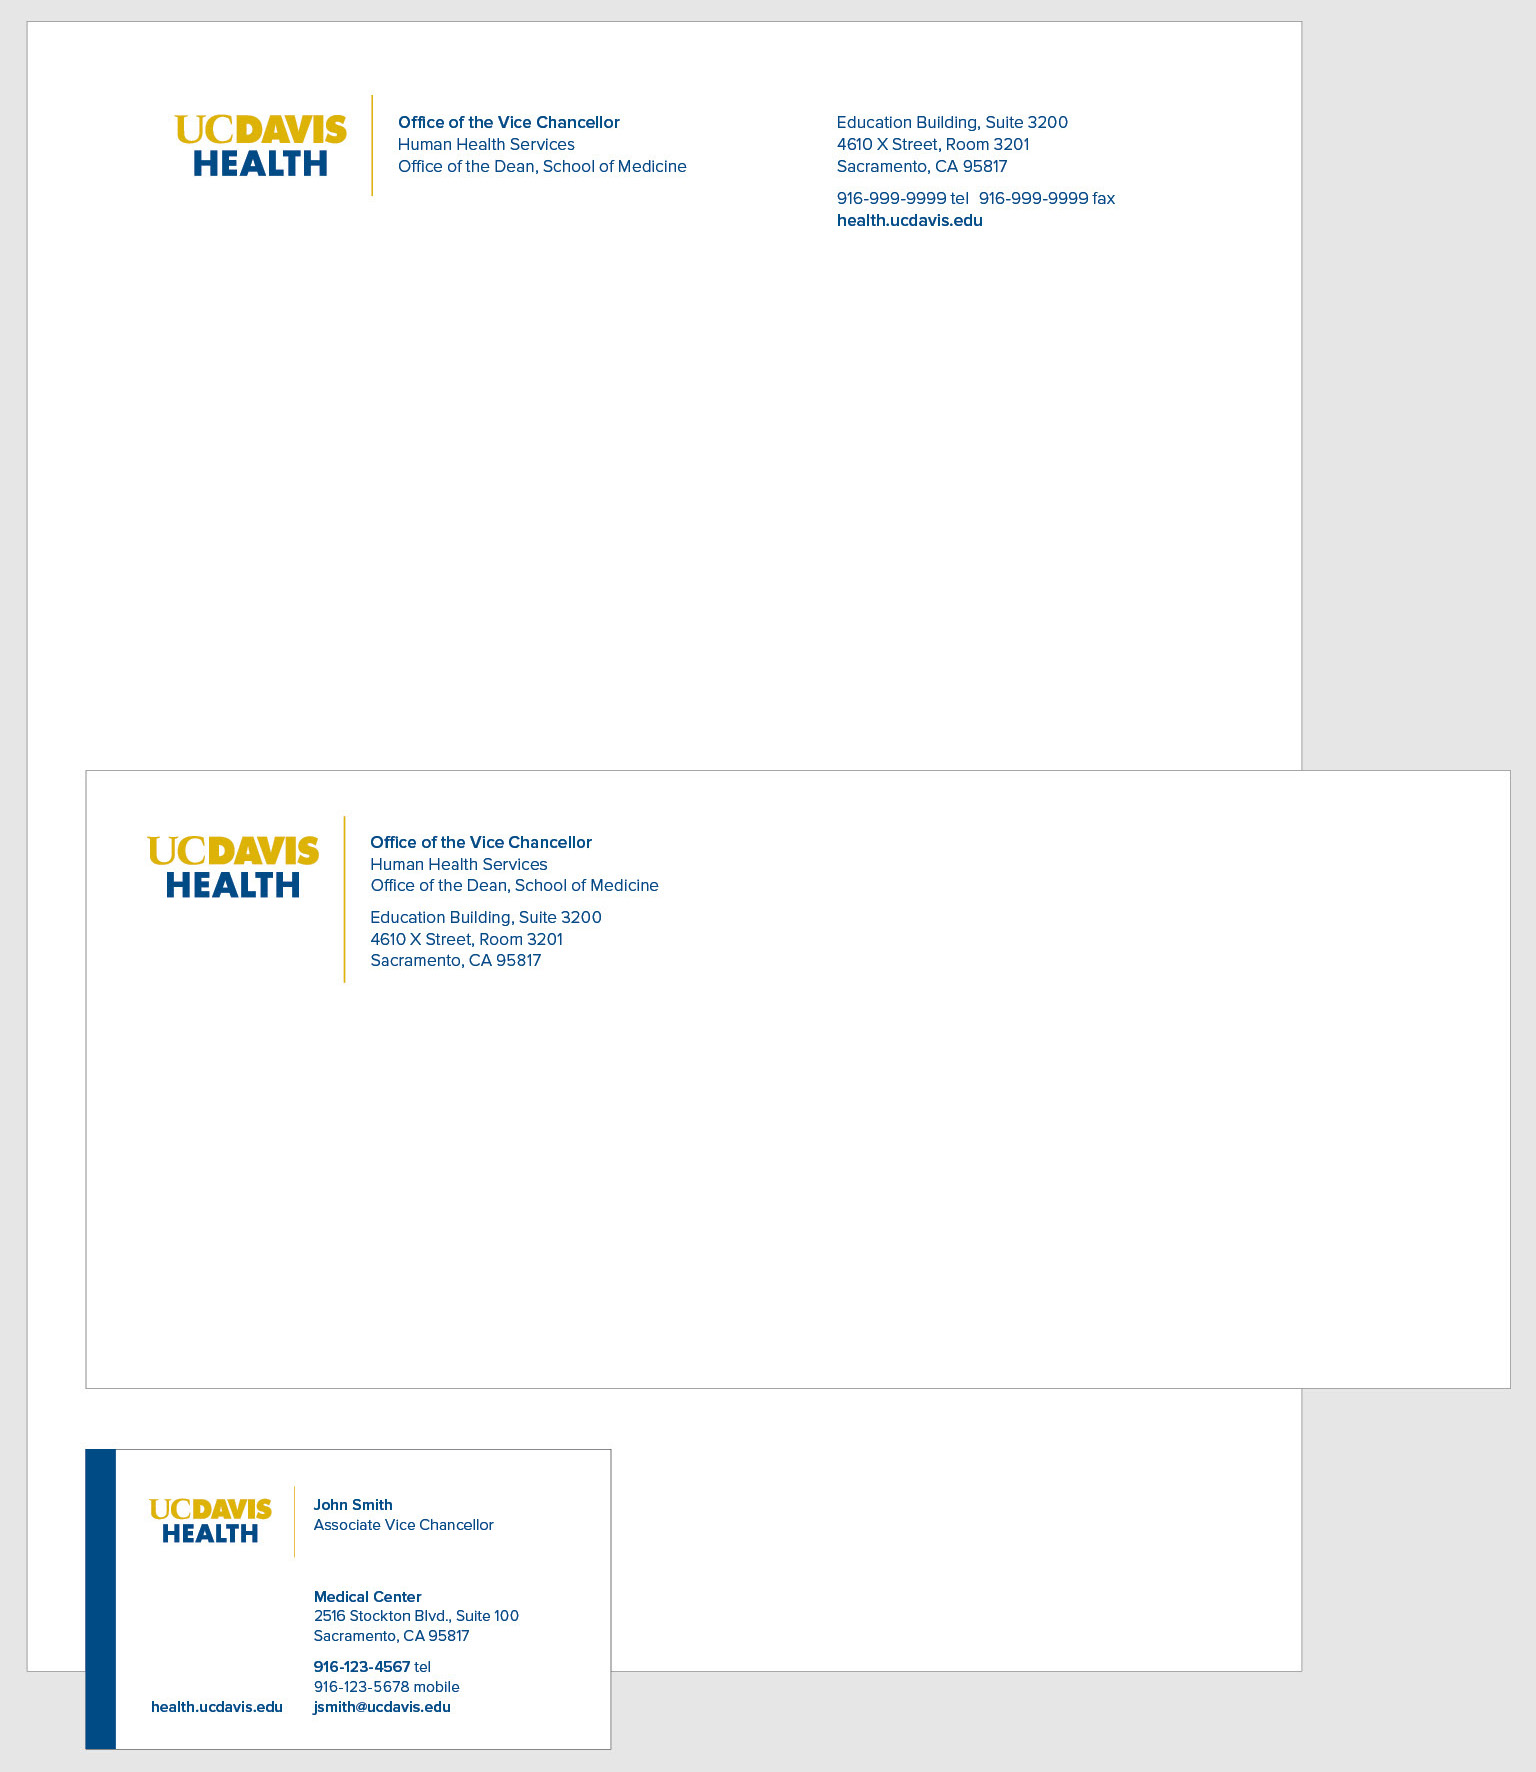 Business stationery example; business card and letterhead